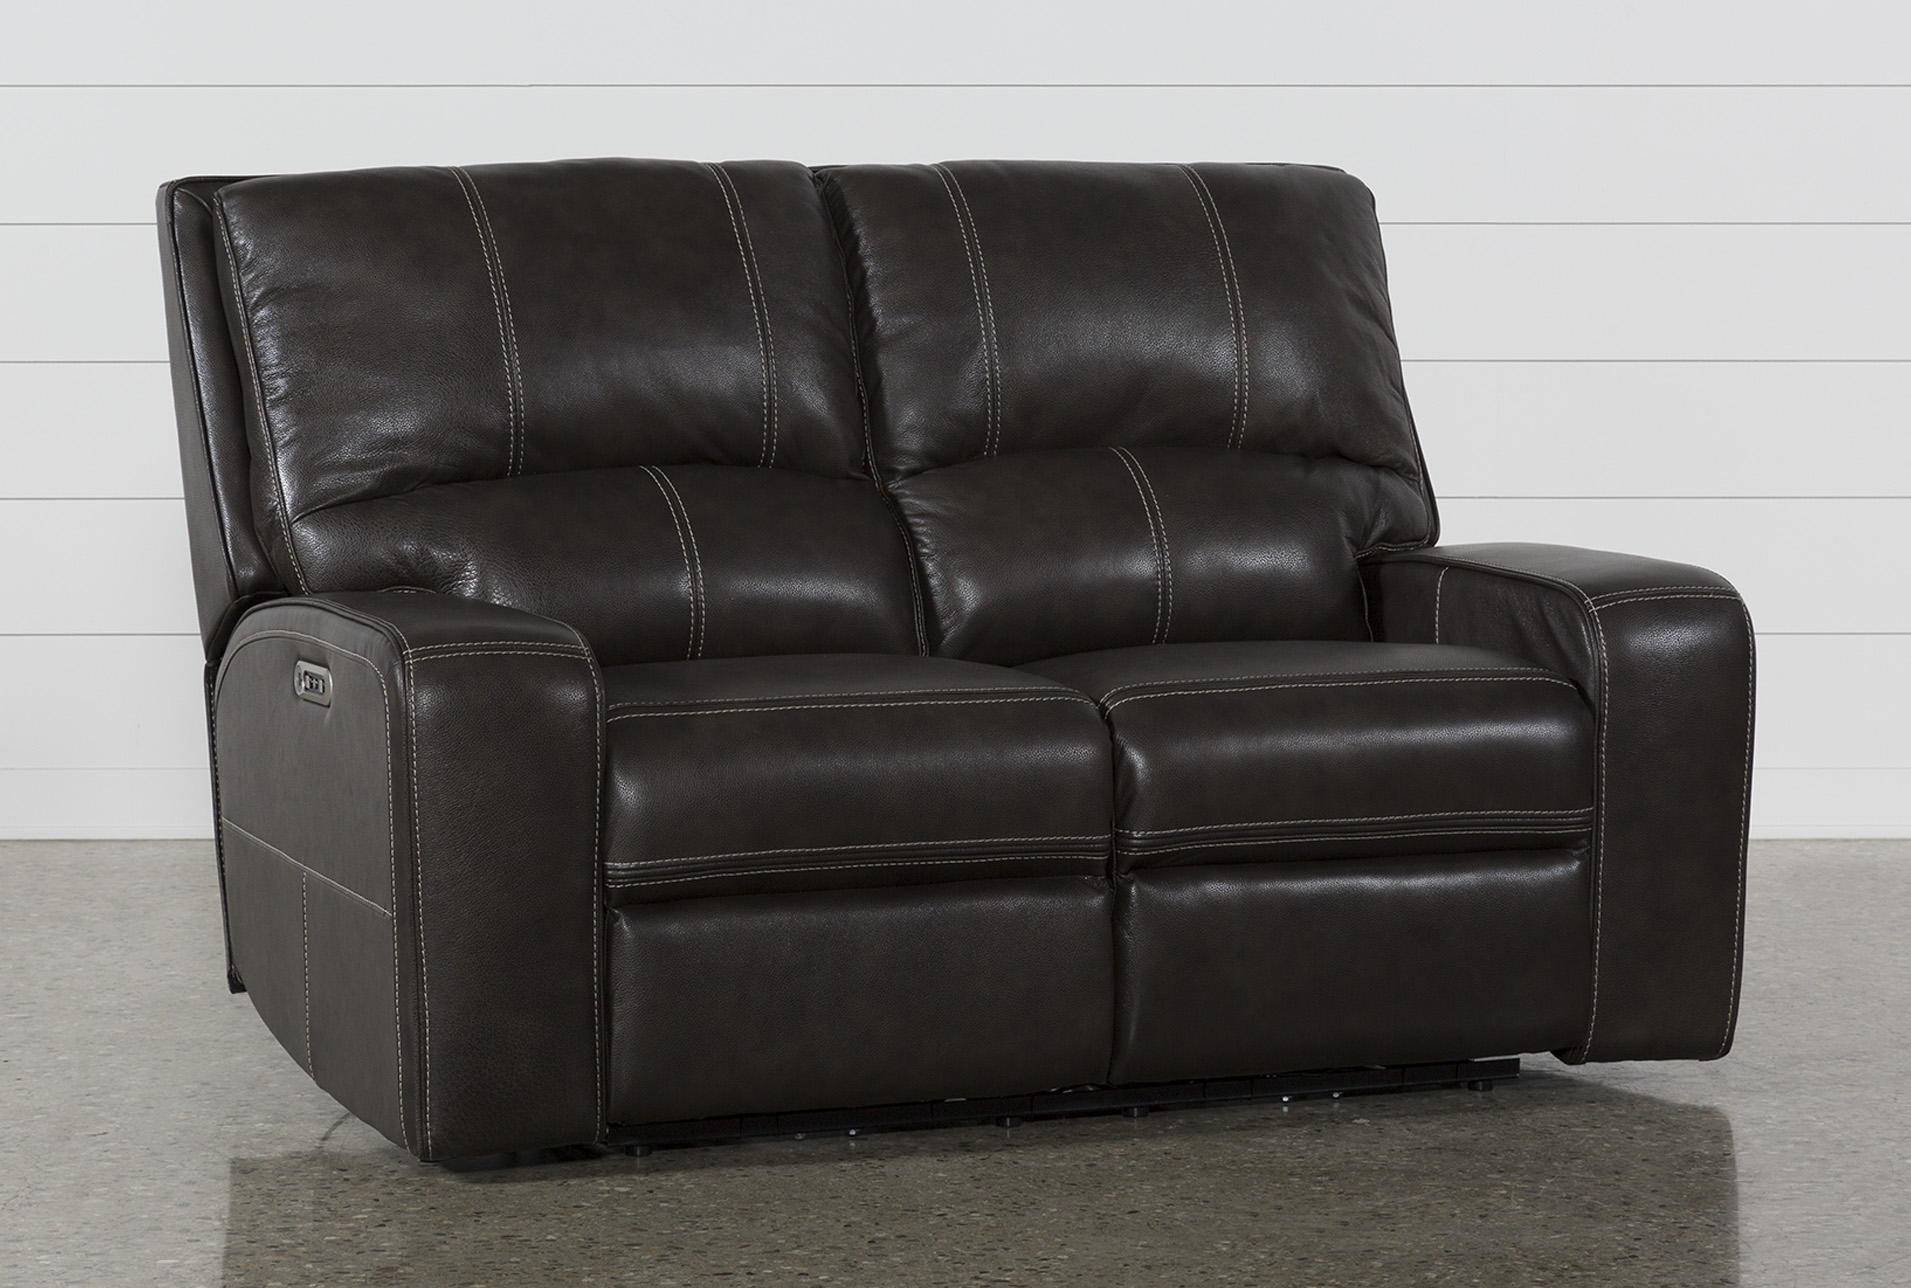 Clyde Grey Leather Power Reclining Loveseat W/Power Headrest & Usb  (Qty: 1) has been successfully added to your Cart.